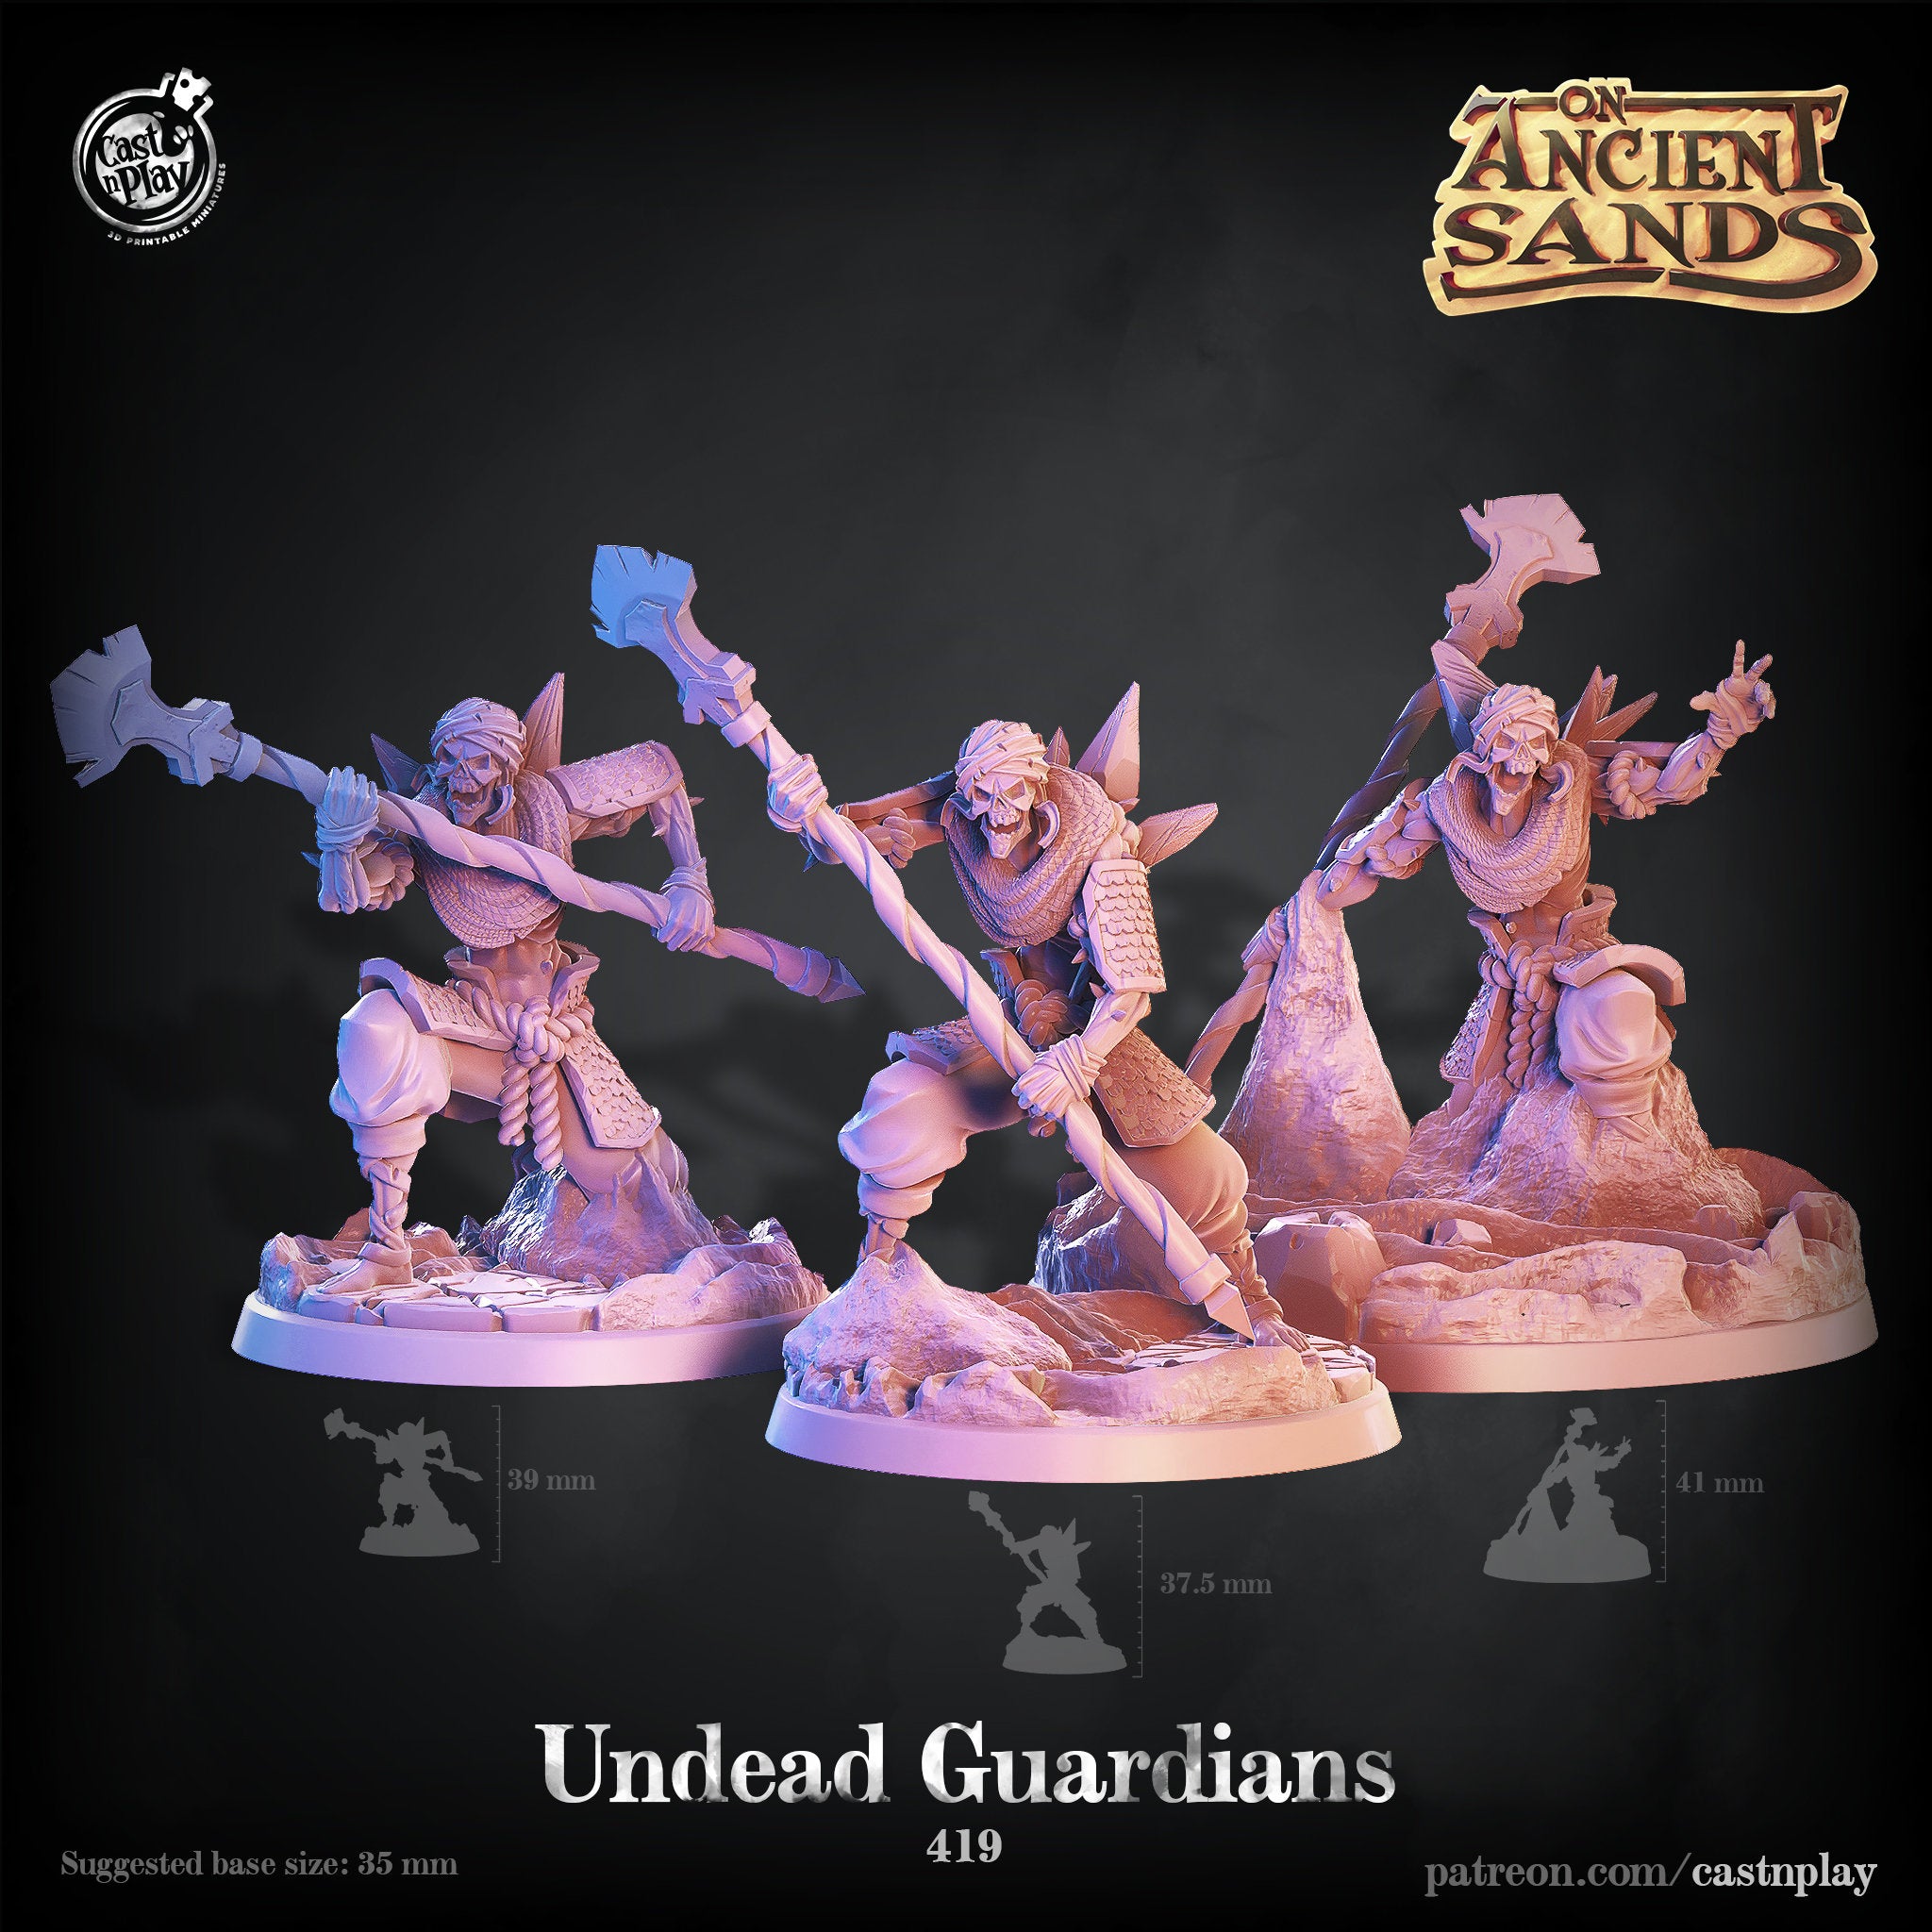 Undead Guardians by Cast N Play (On Ancient Sands)